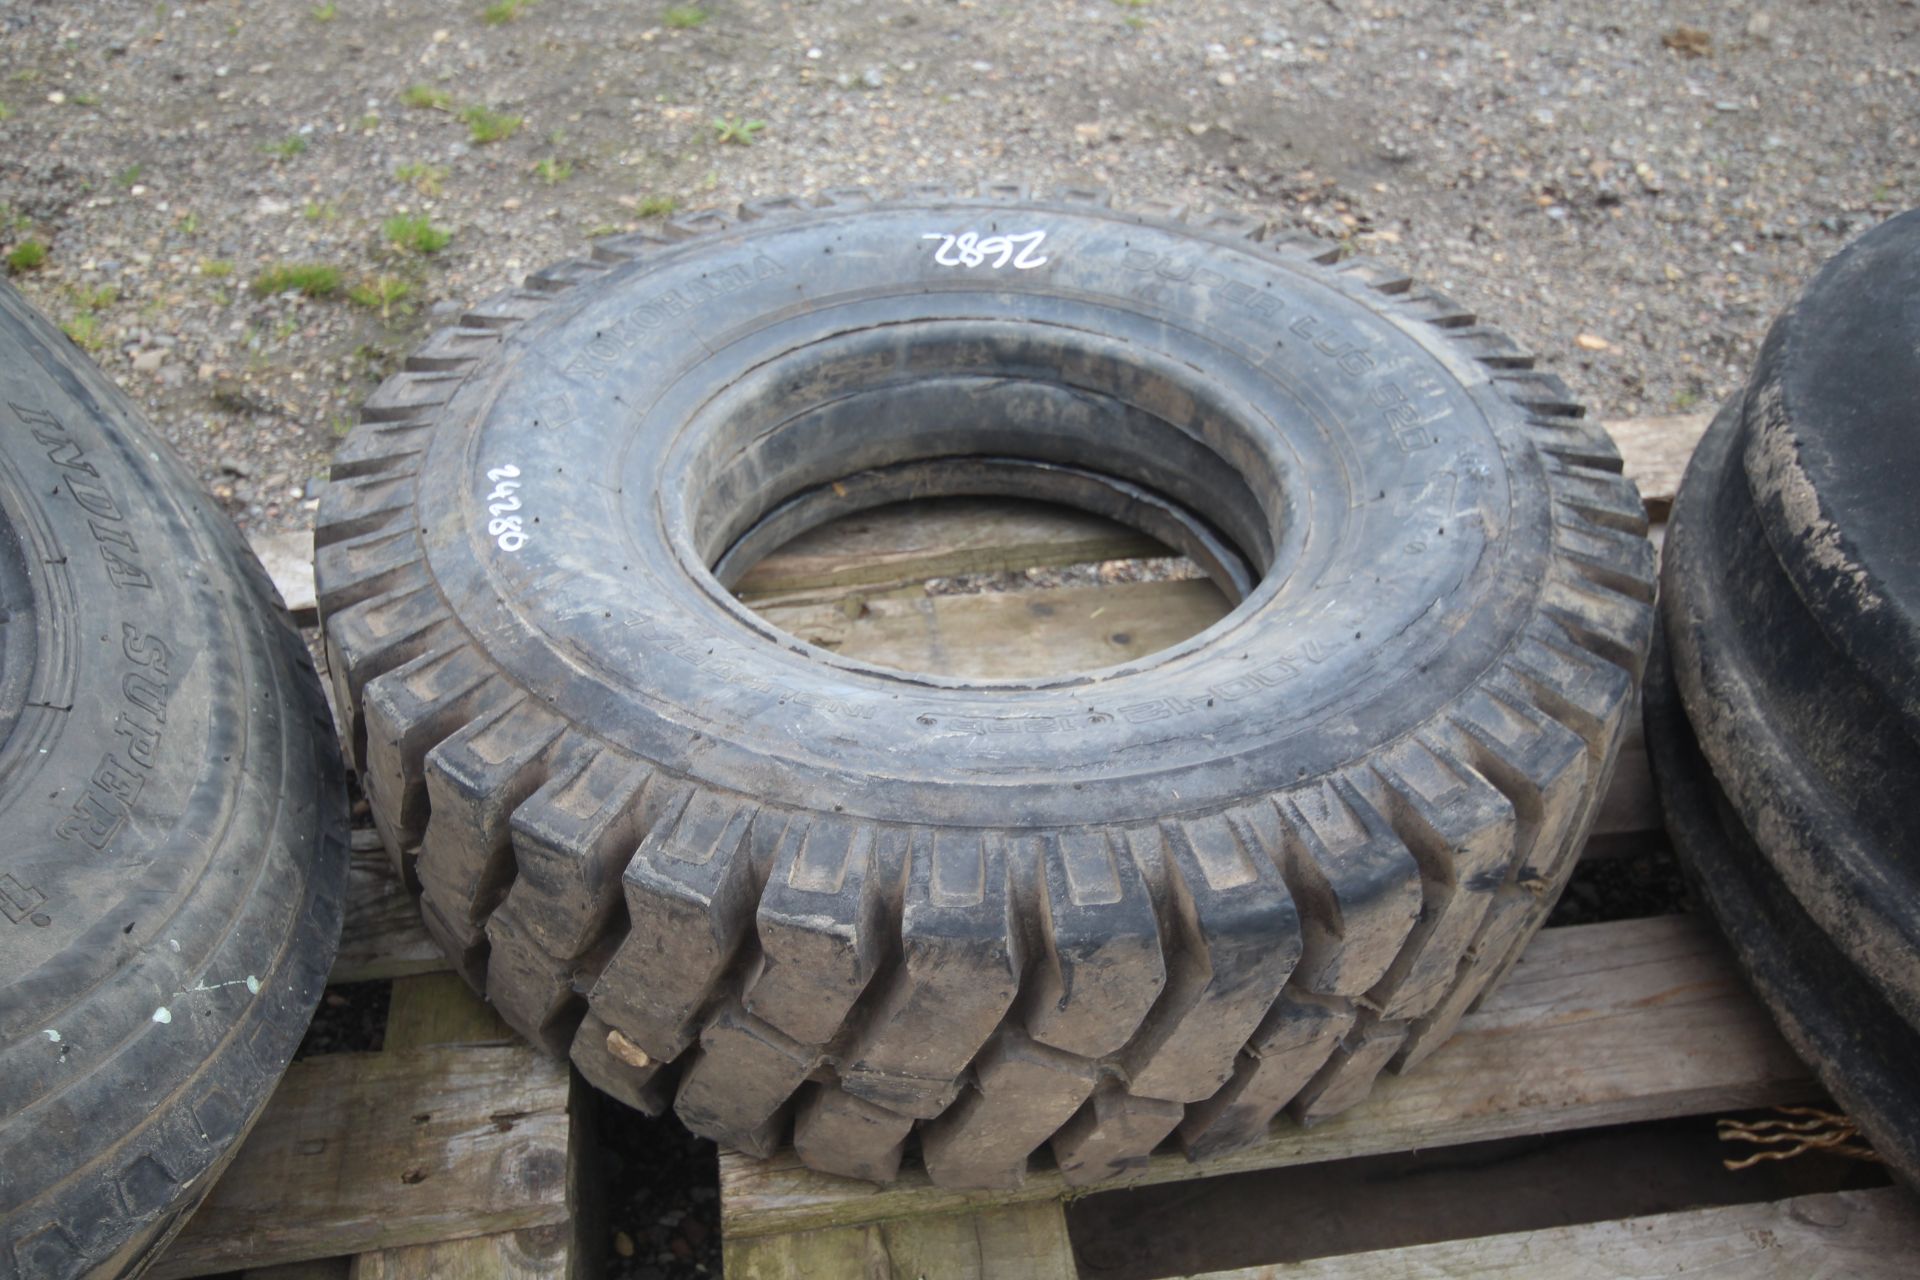 700x12 forklift tyre @ 100%. - Image 2 of 4